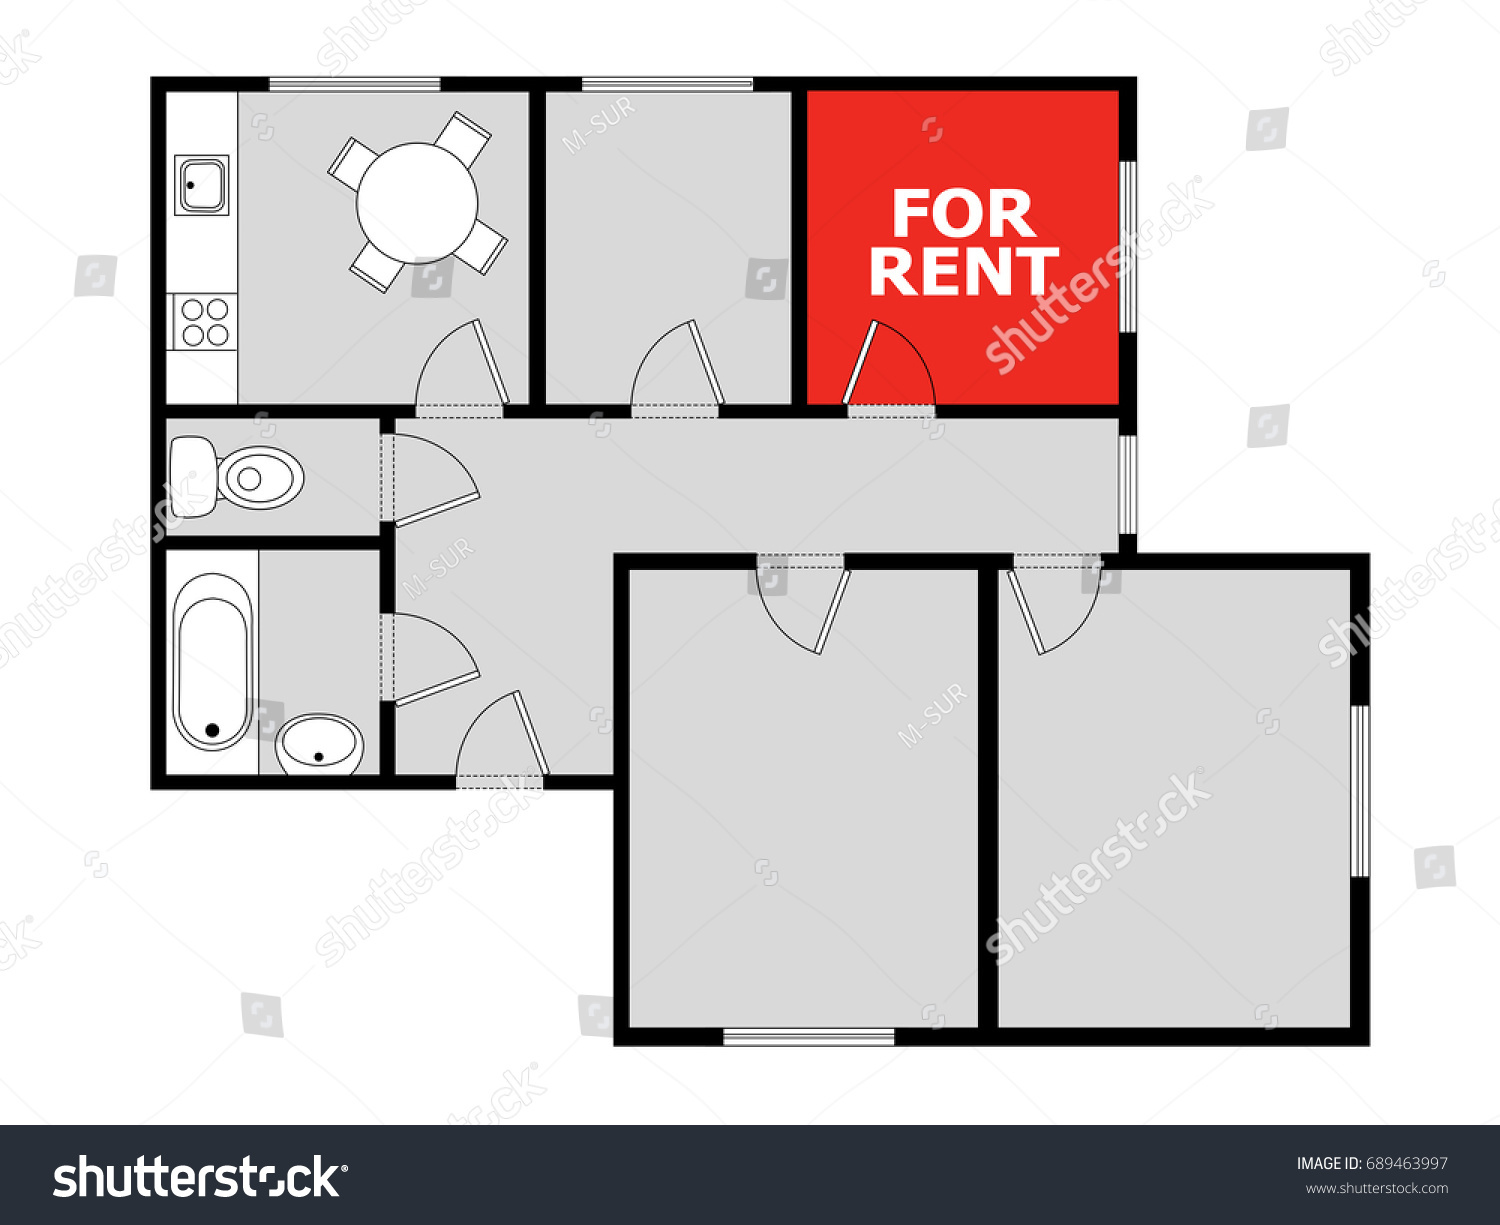 SVG of Flatsharing - plan of flat with marked free room as advertising to share housing, living and staying at apartment. Vacant bedroom is free for accommodation of tenant and flatmate / roommate svg